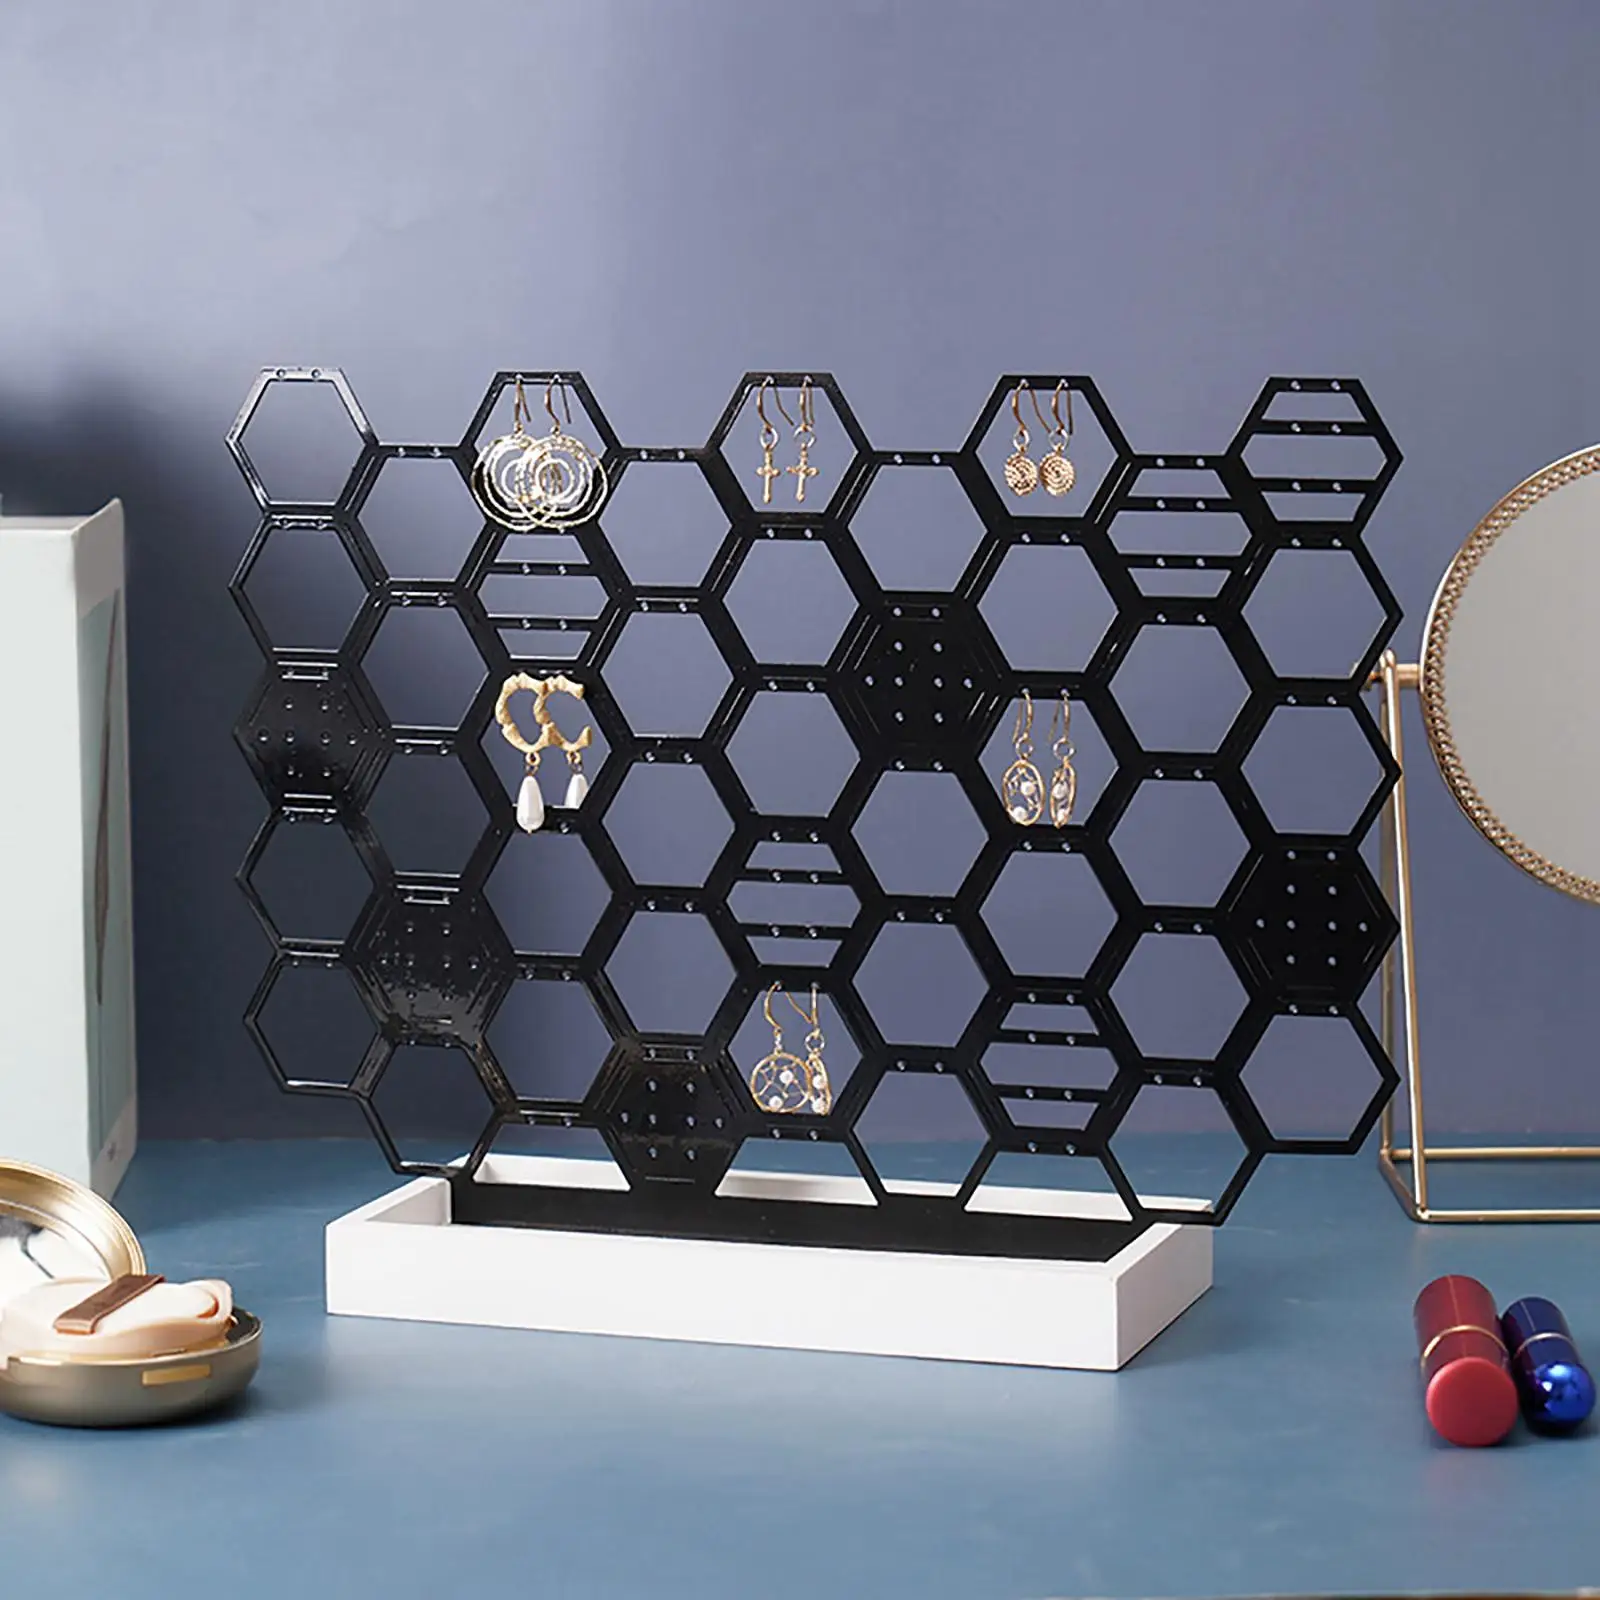 Earring Display Stand Honeycomb Shaped with Base Metal Storage Rack Jewelry Organizer Holder for Selling Necklaces Ear